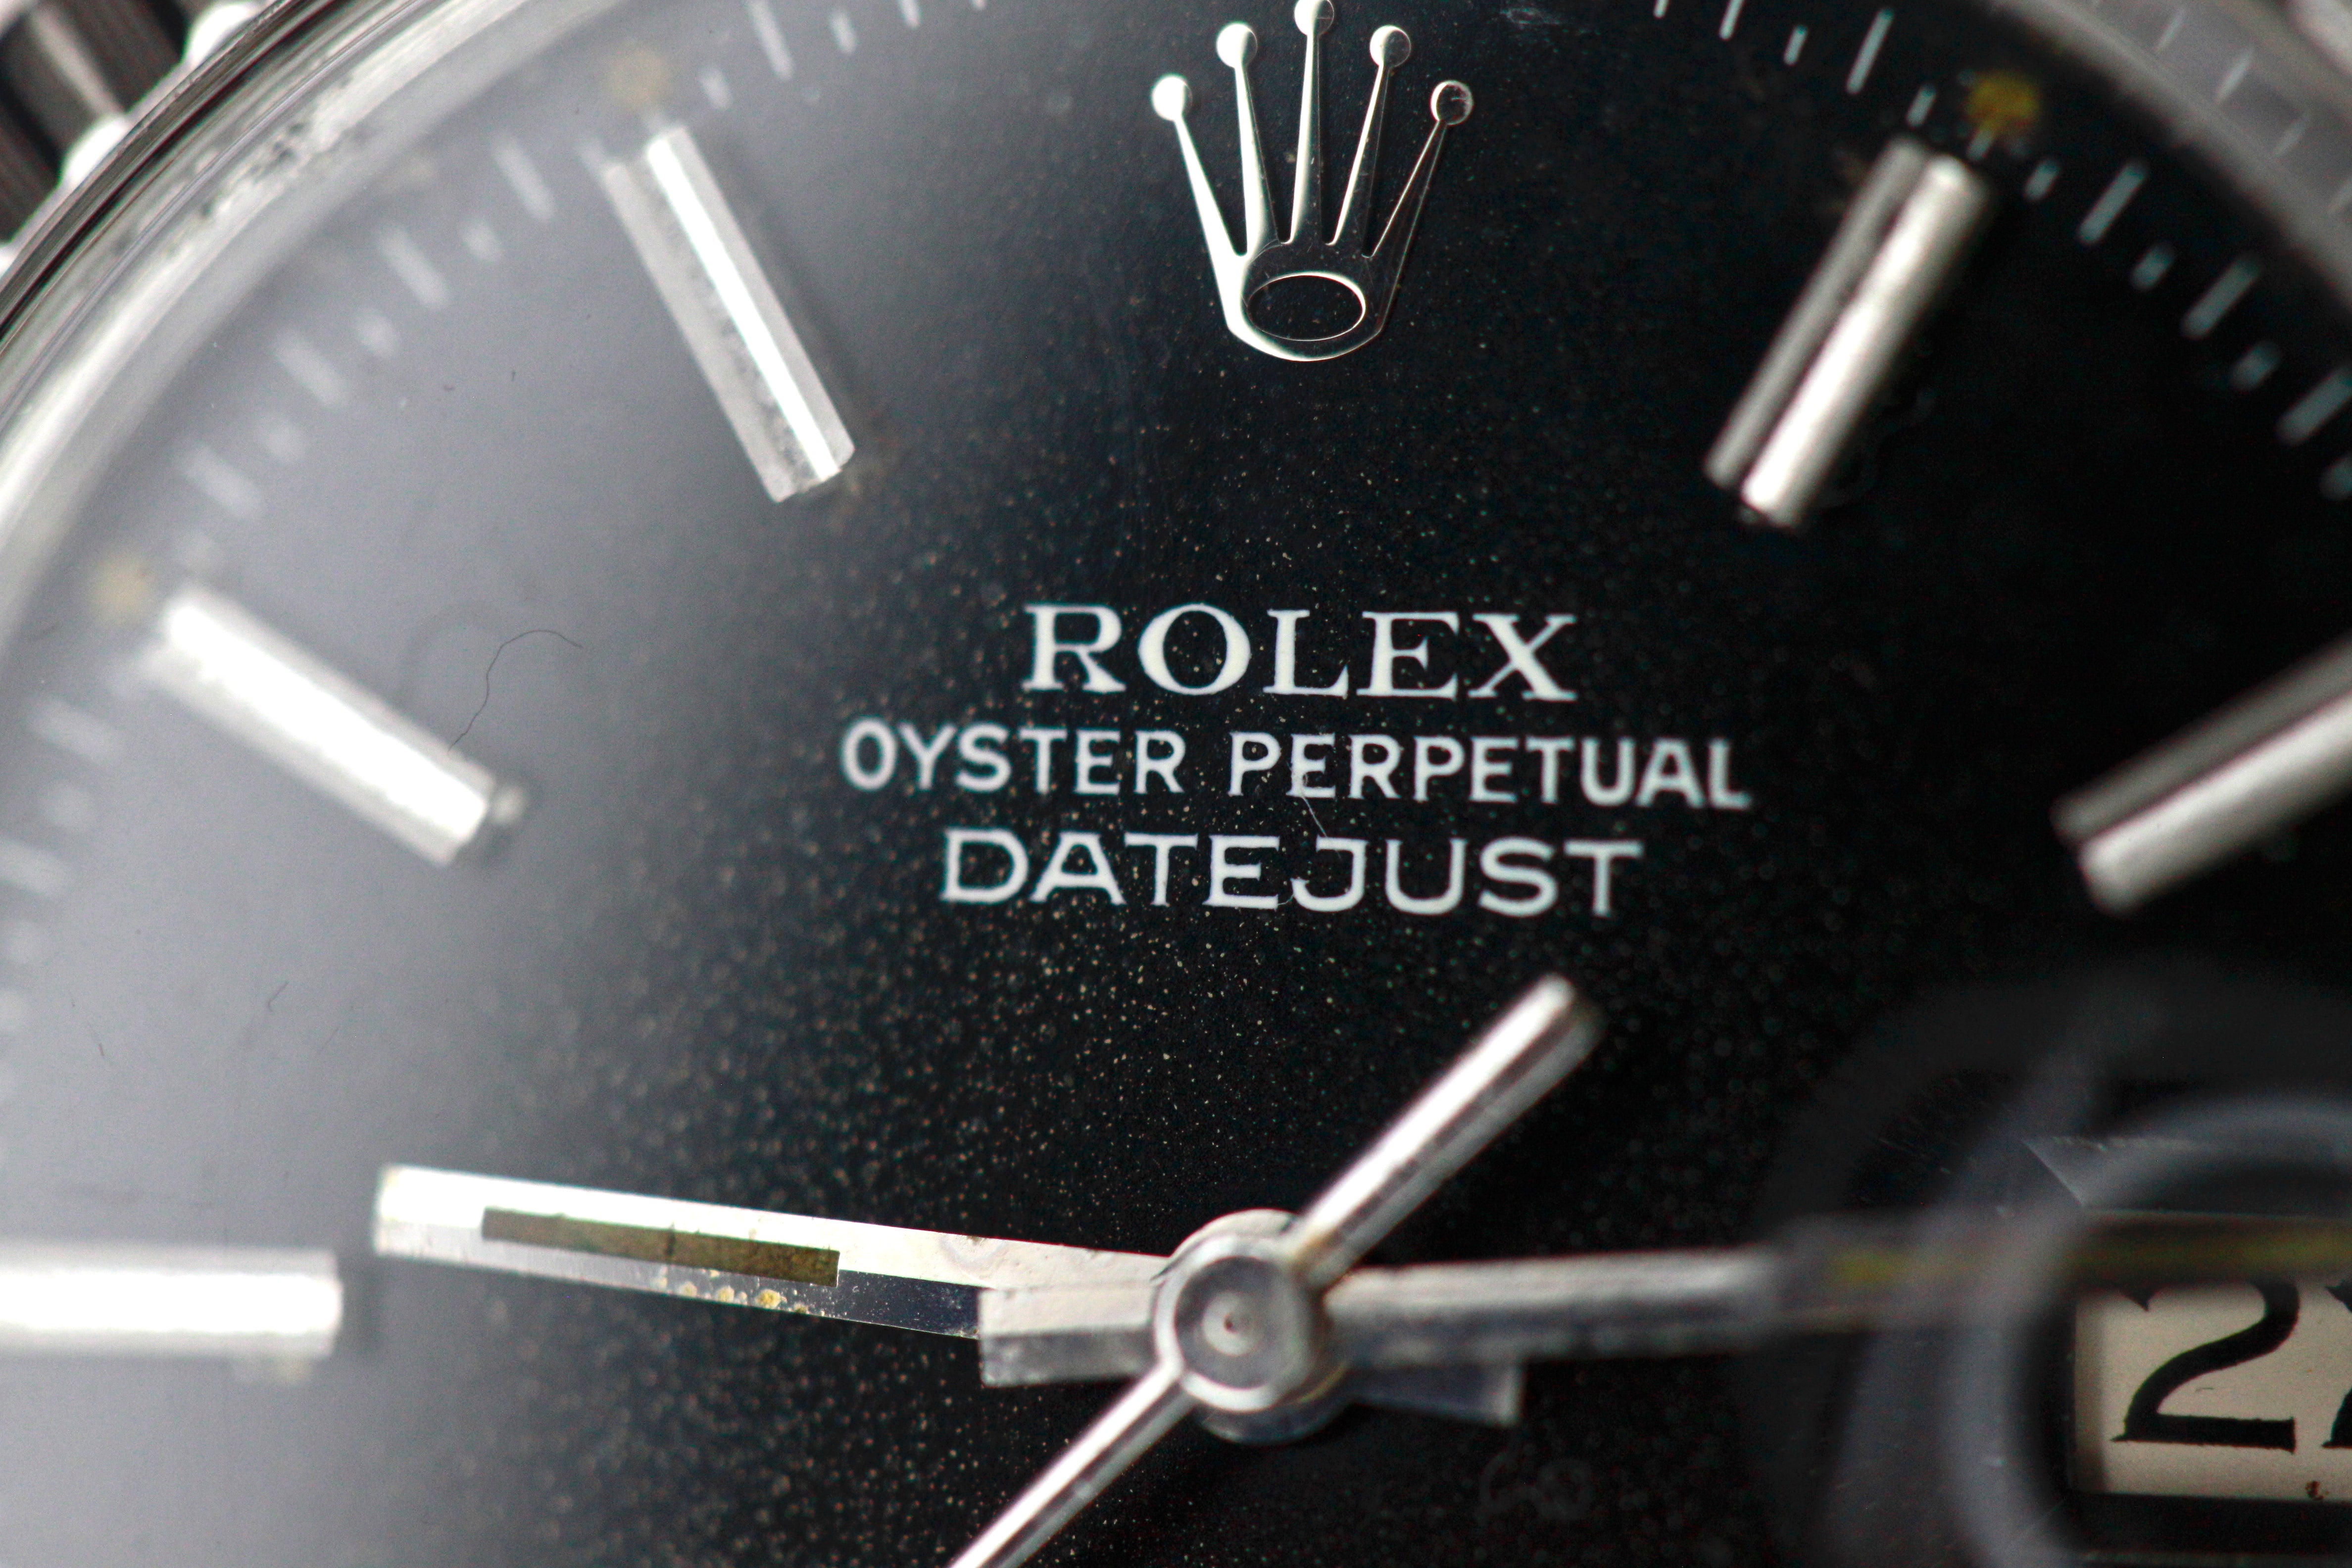 Rolex Datejust ref 16030 Black dial from 1983 with stunning patina